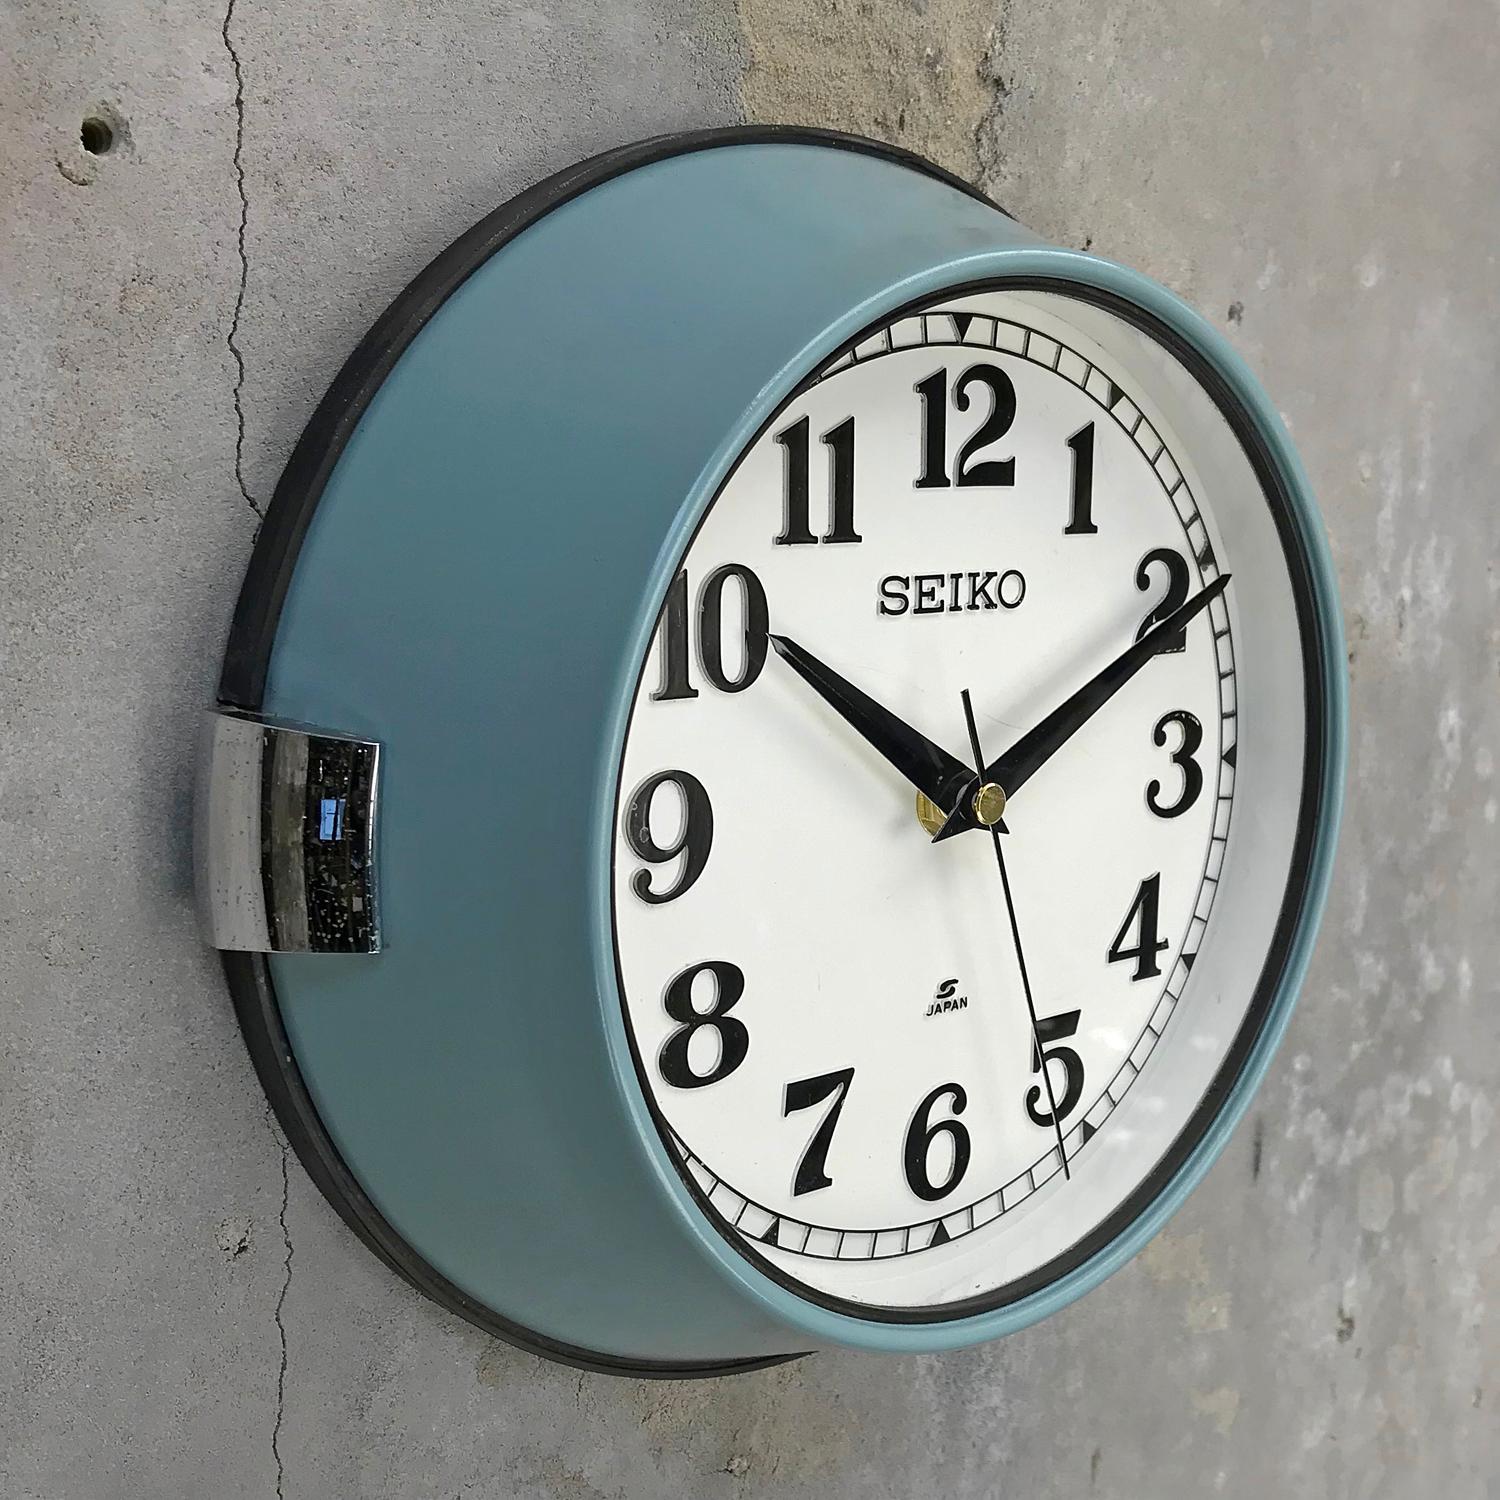 Seiko super tanker slave clock original aqua marine green finish

A reclaimed and restored maritime slave clock.

These clocks were used in great numbers on super tankers, cargo ships and military vessels built during the 1970s and housed a movement